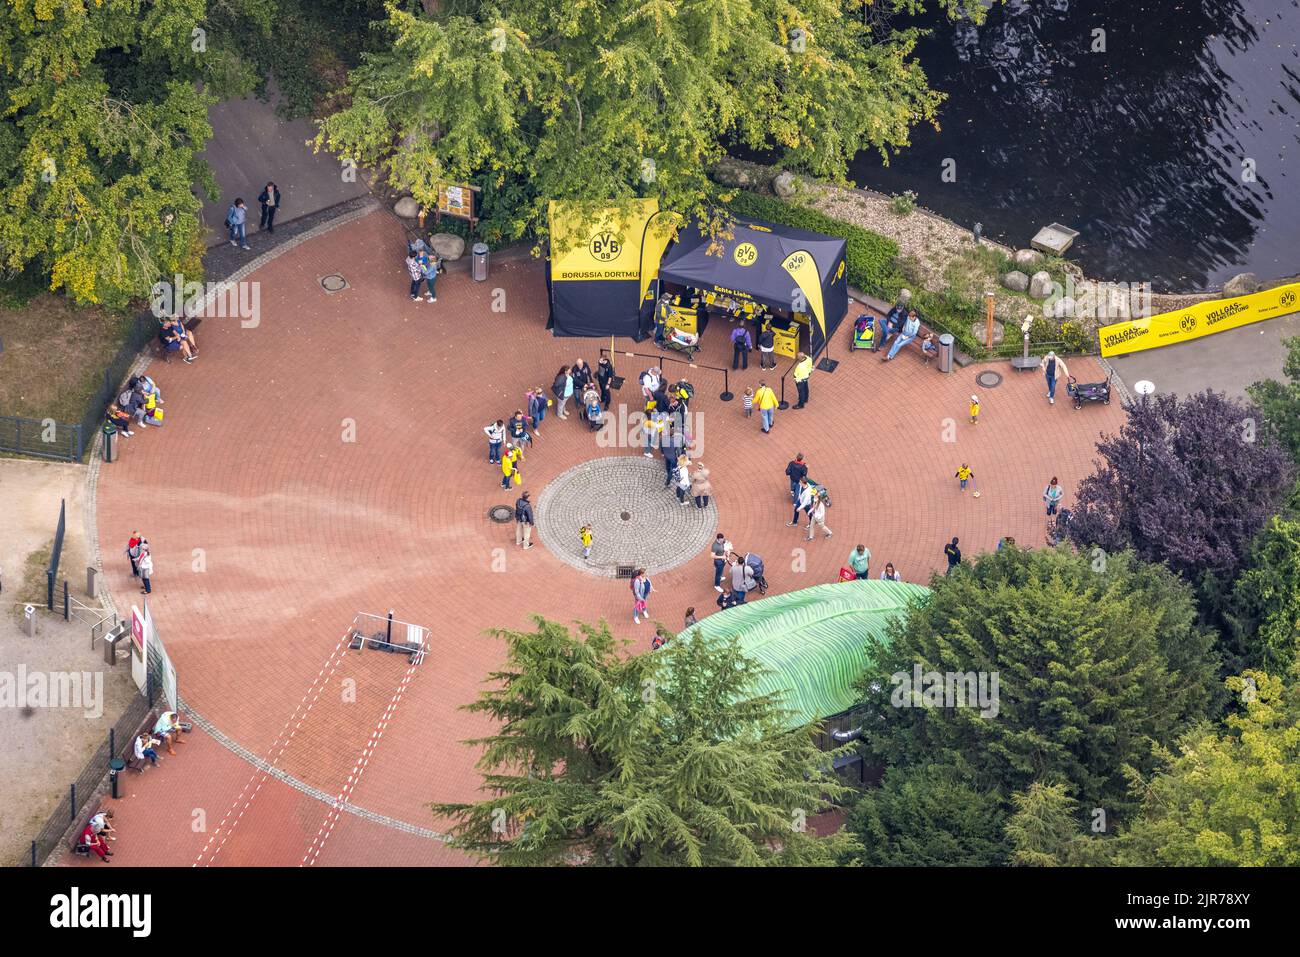 Aerial view, BVB 09 information stand and fans at Flamingo restaurant in Rombergpark in Brünninghausen district of Dortmund, Ruhr area, North Rhine-We Stock Photo